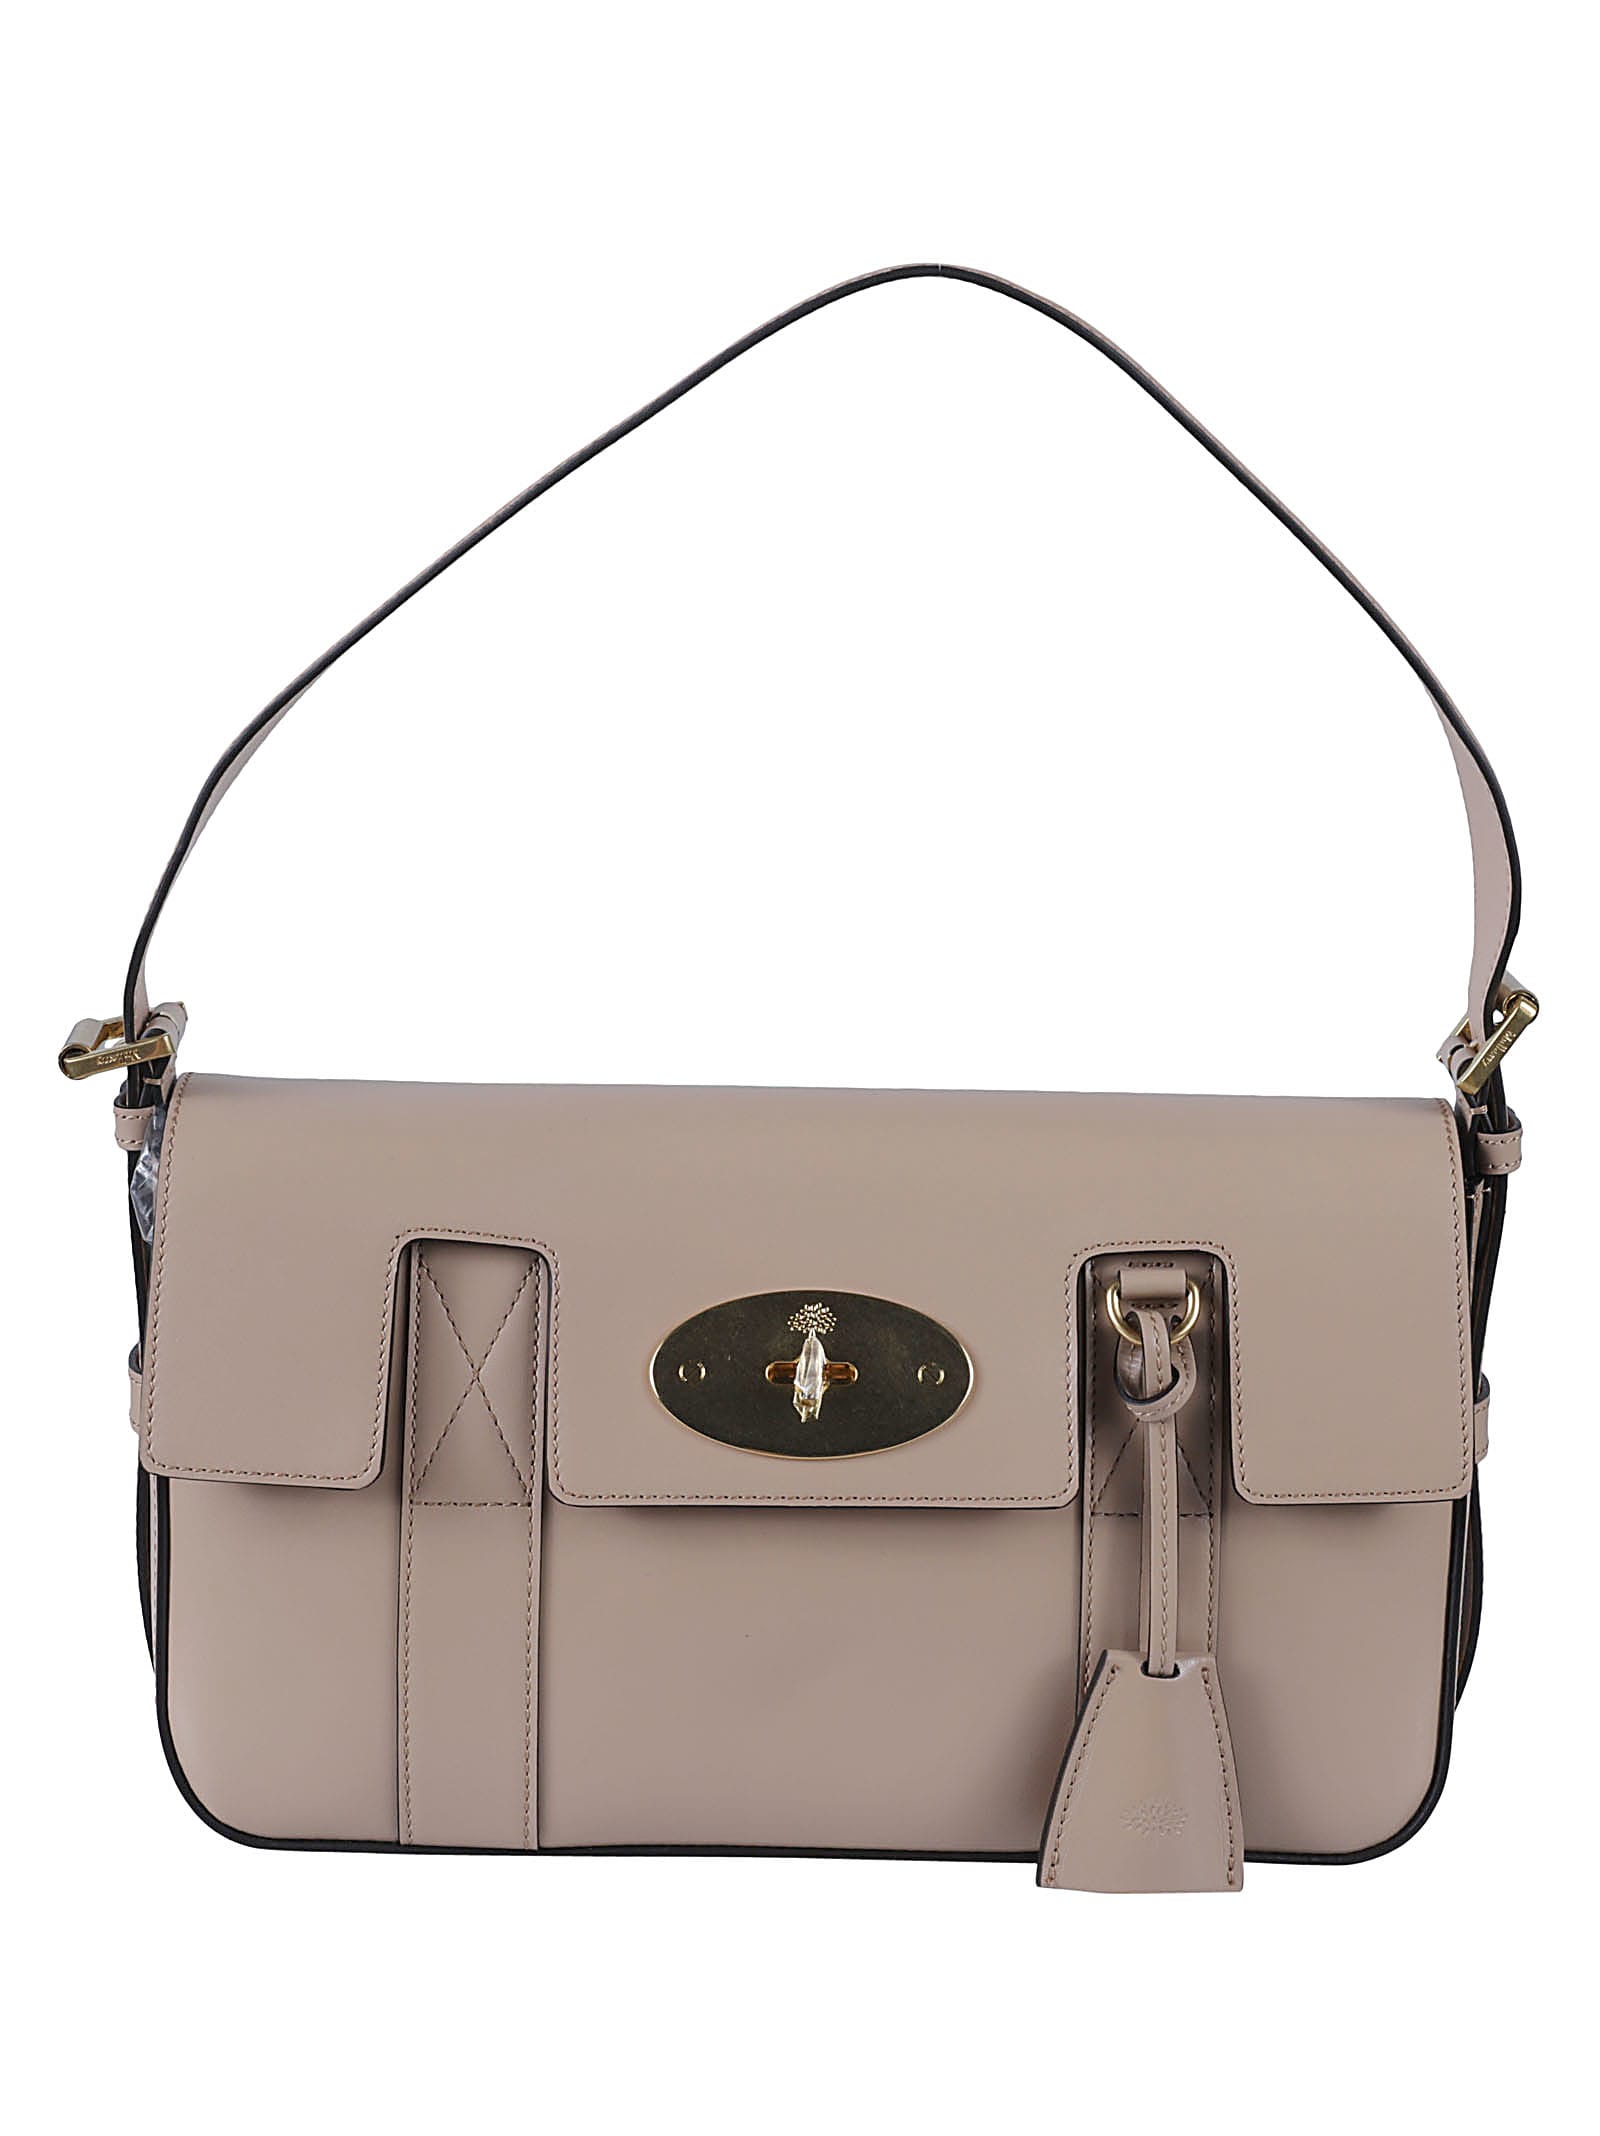 Shop Mulberry Bayswater Shoulder Bags (HH2873 205 A217) by FSshop51